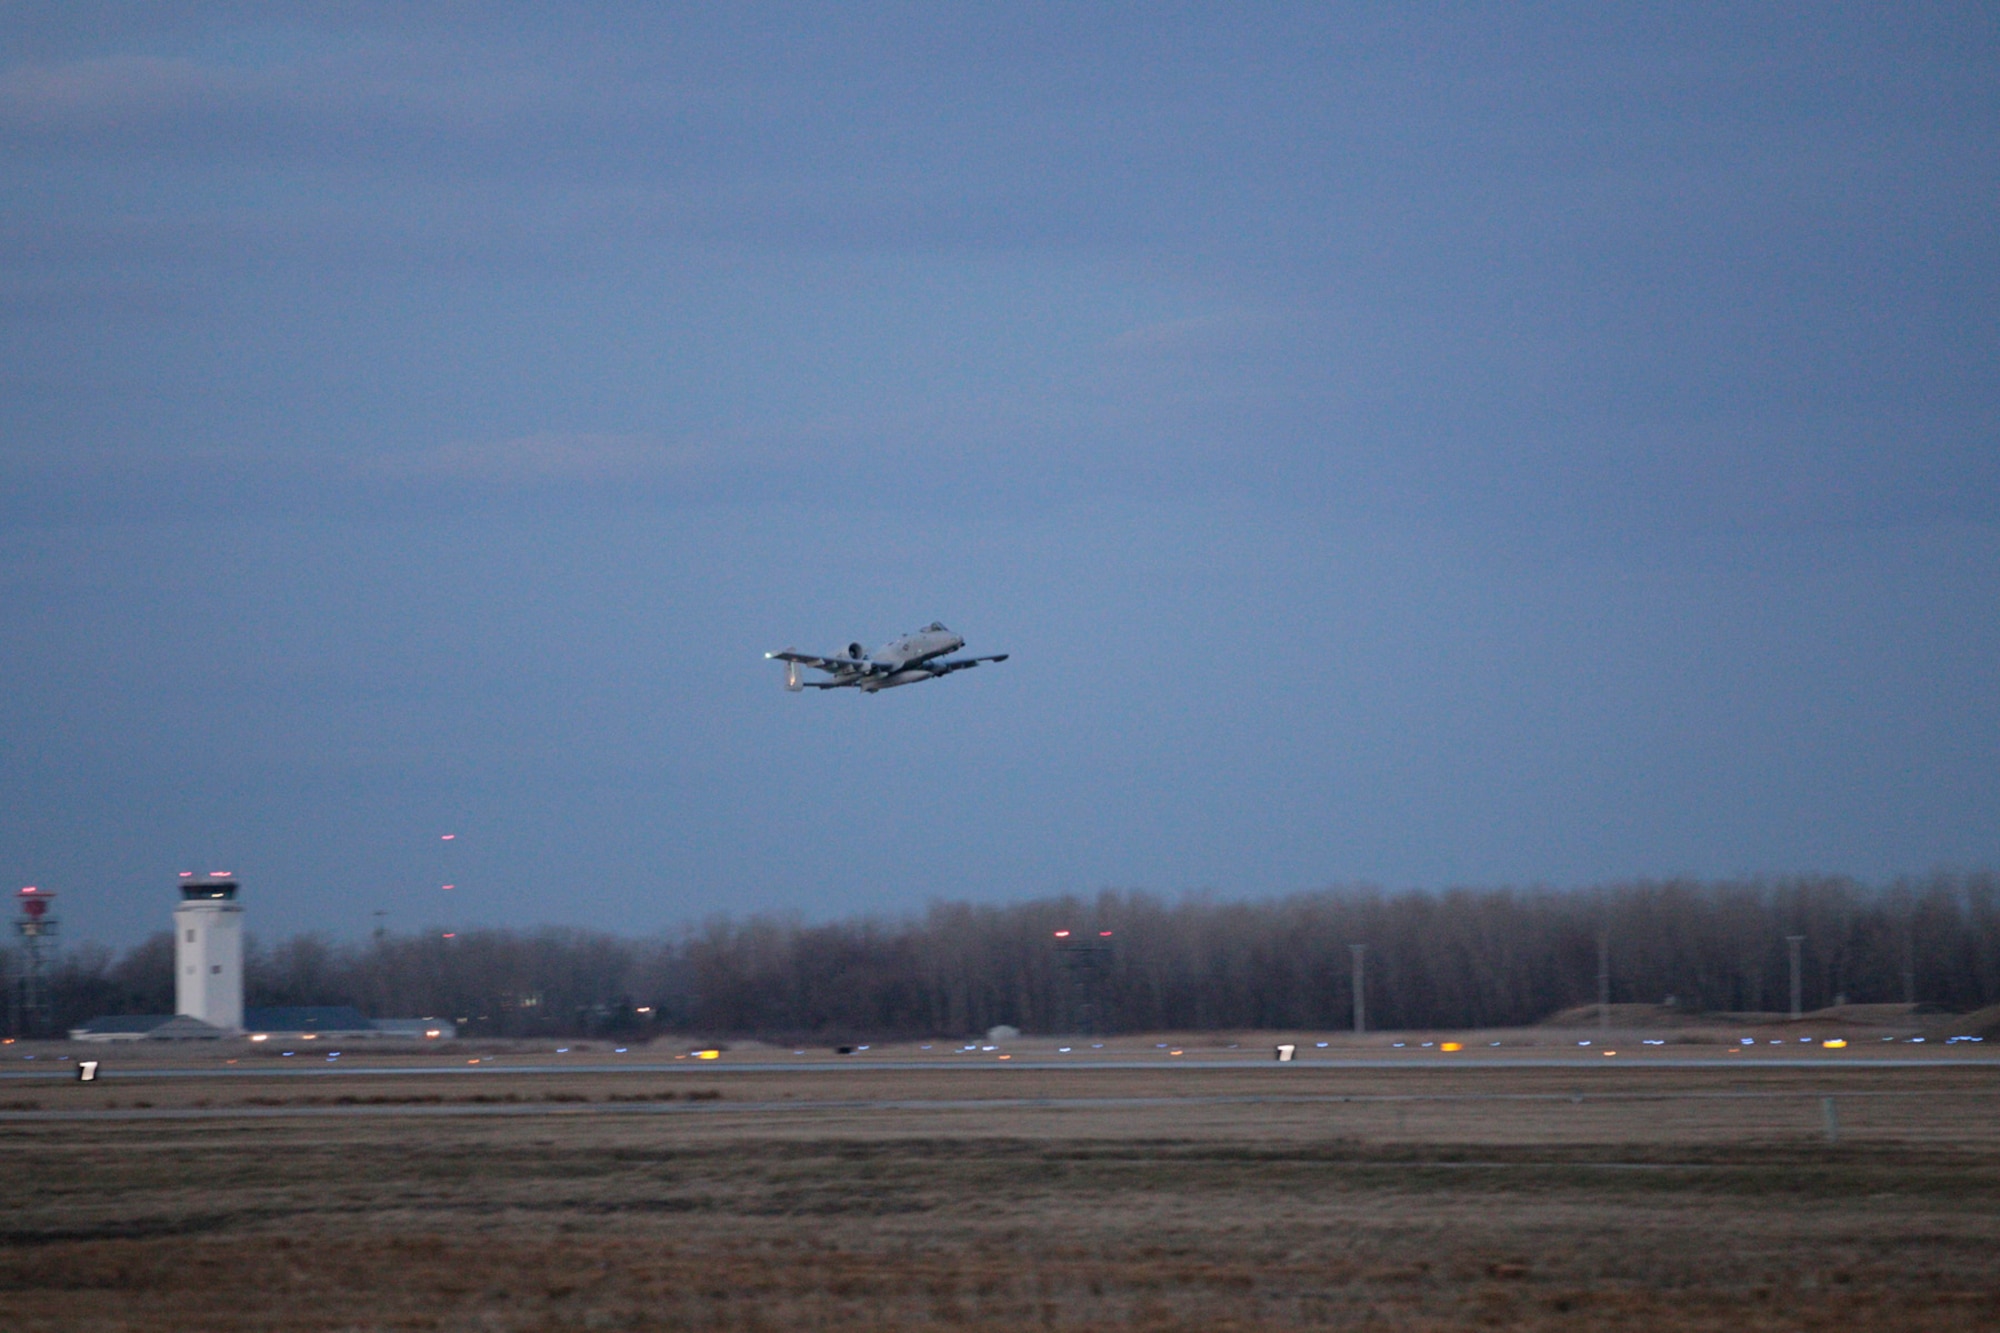 150411-Z-NJ721-085 – An A-10 Thunderbolt II from the 107th Fighter Squadron takes off from Selfridge Air National Guard Base at dawn on April 11, 2015. The A-10s and related Airmen deployed to Southwest Asia.  (U.S. Air National Guard photo by Tech. Sgt. Robert Hanet)